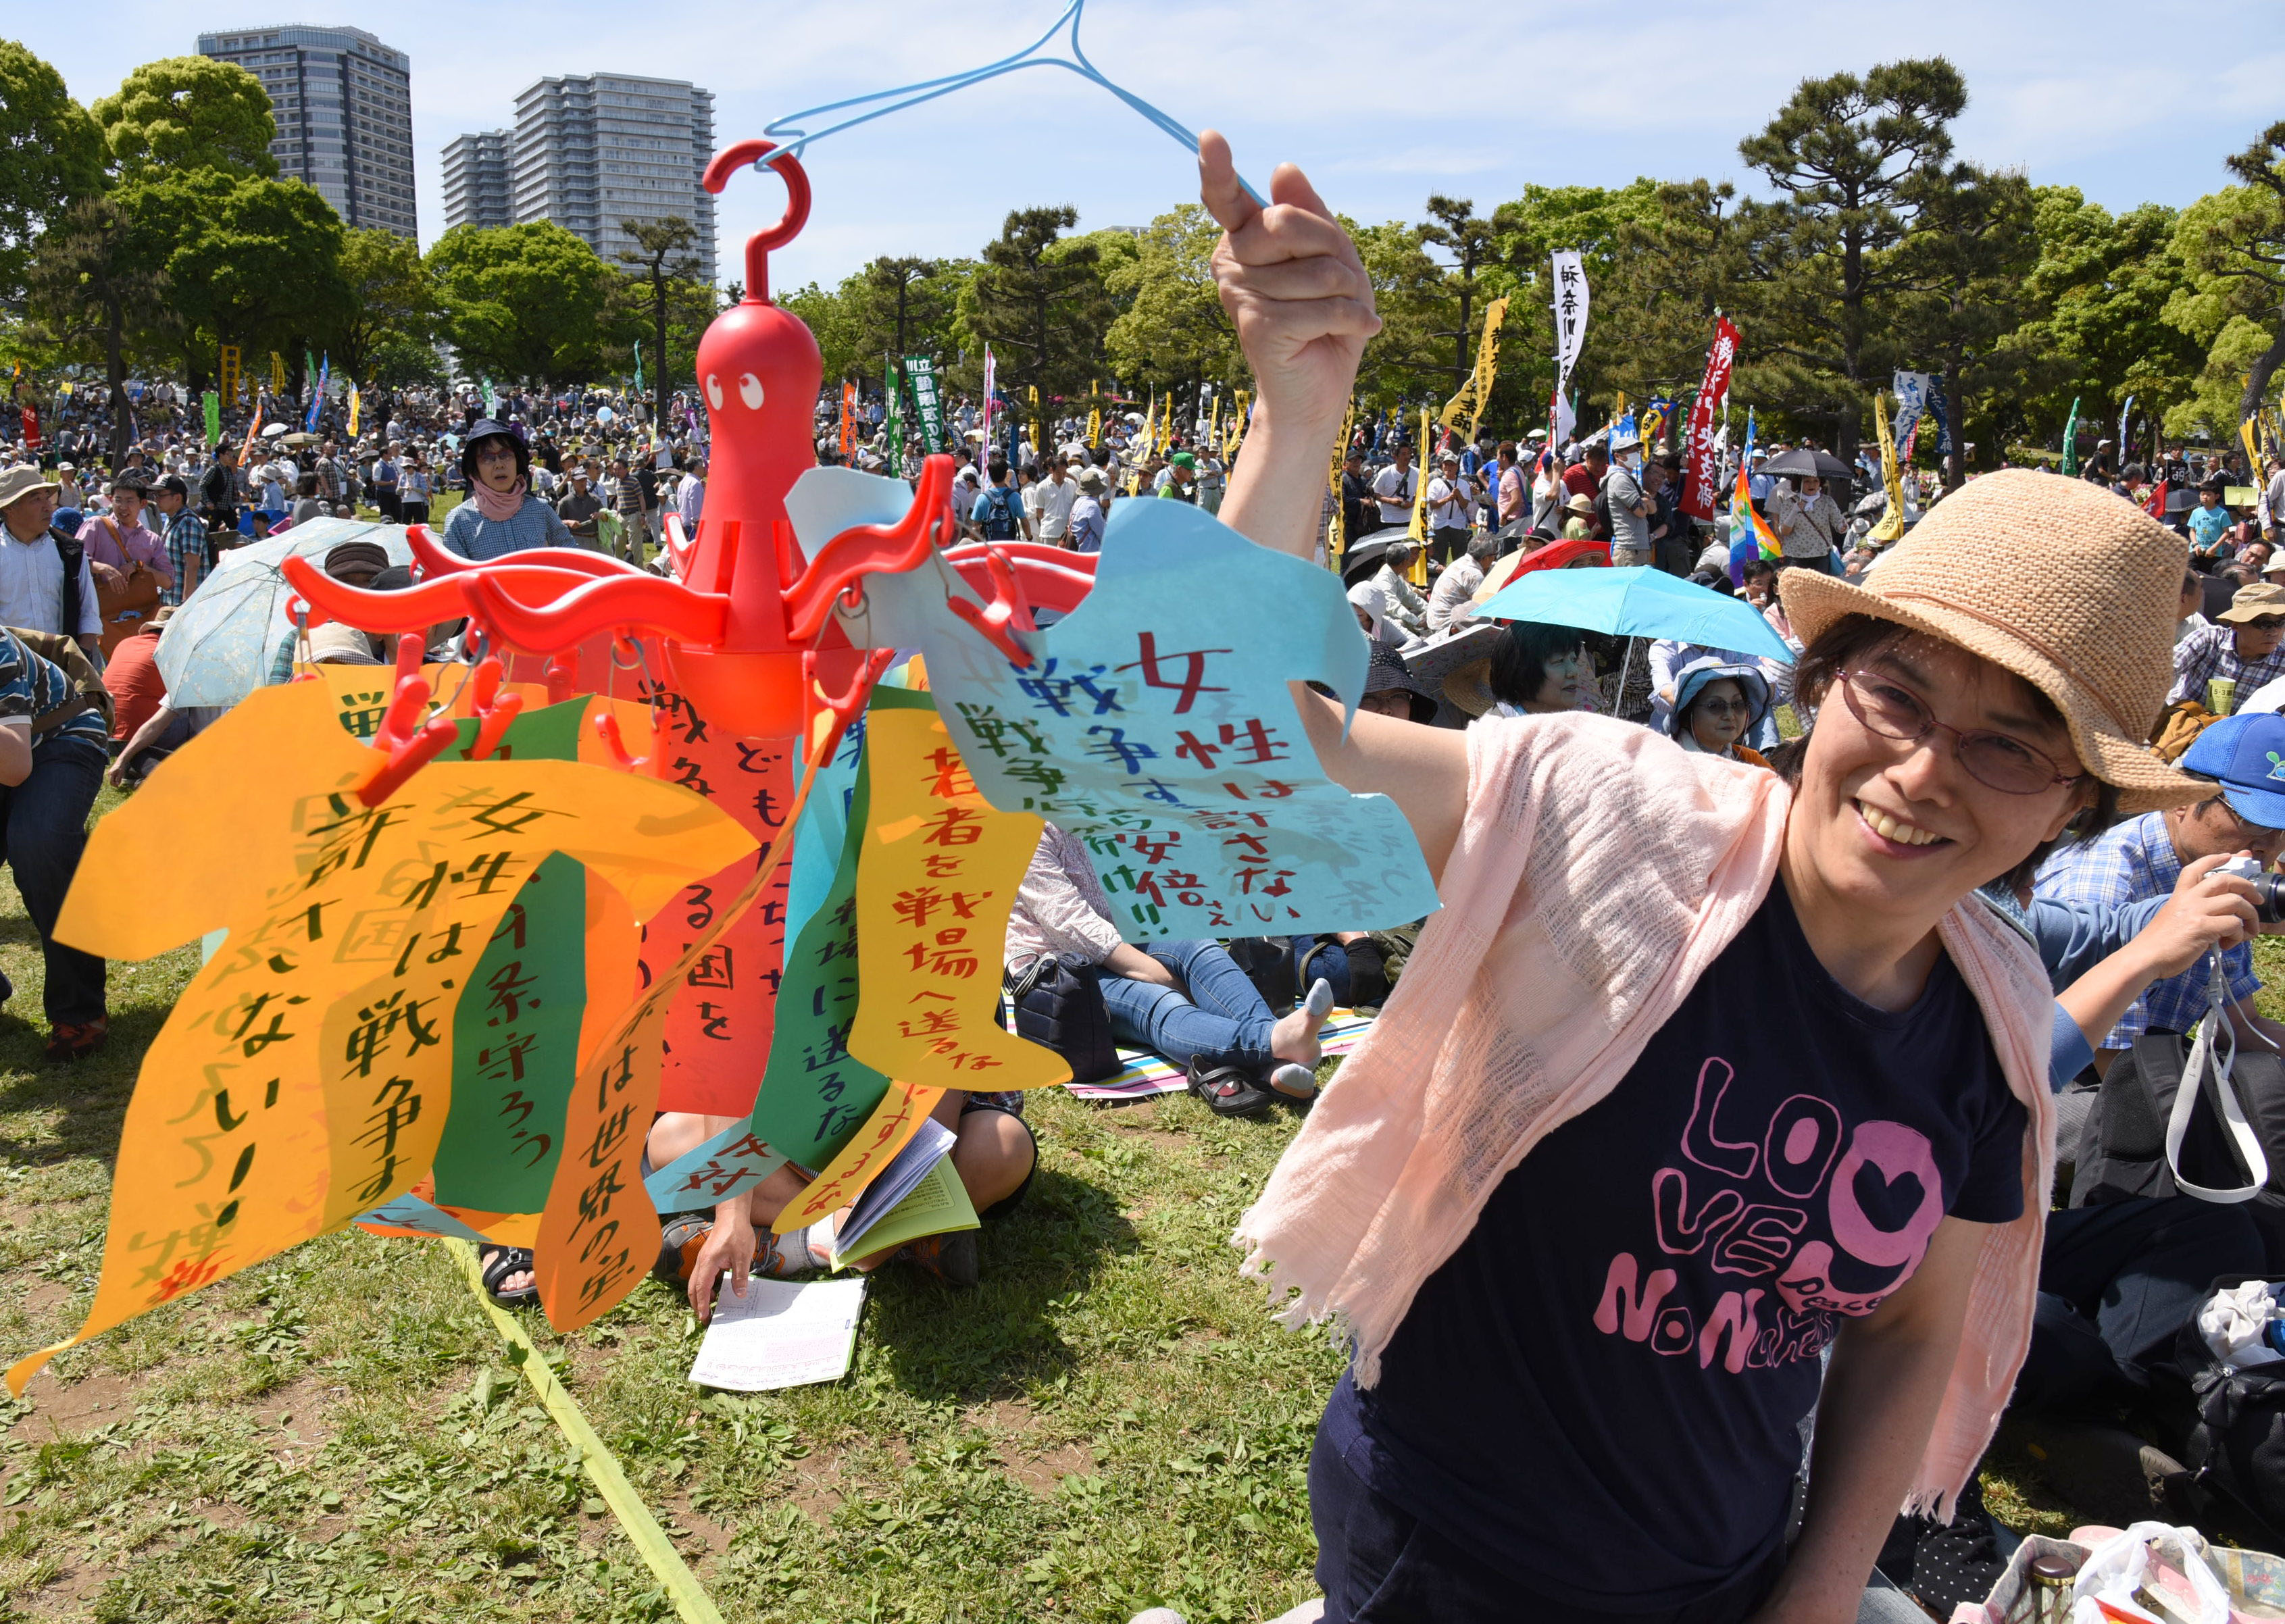 An activist holds up anti-war messages Sunday at Yokohama's Rinko Park, where 30,000 people gathered for a Constitution Day rally to protest moves to revise the supreme law. | SATOKO KAWASAKI